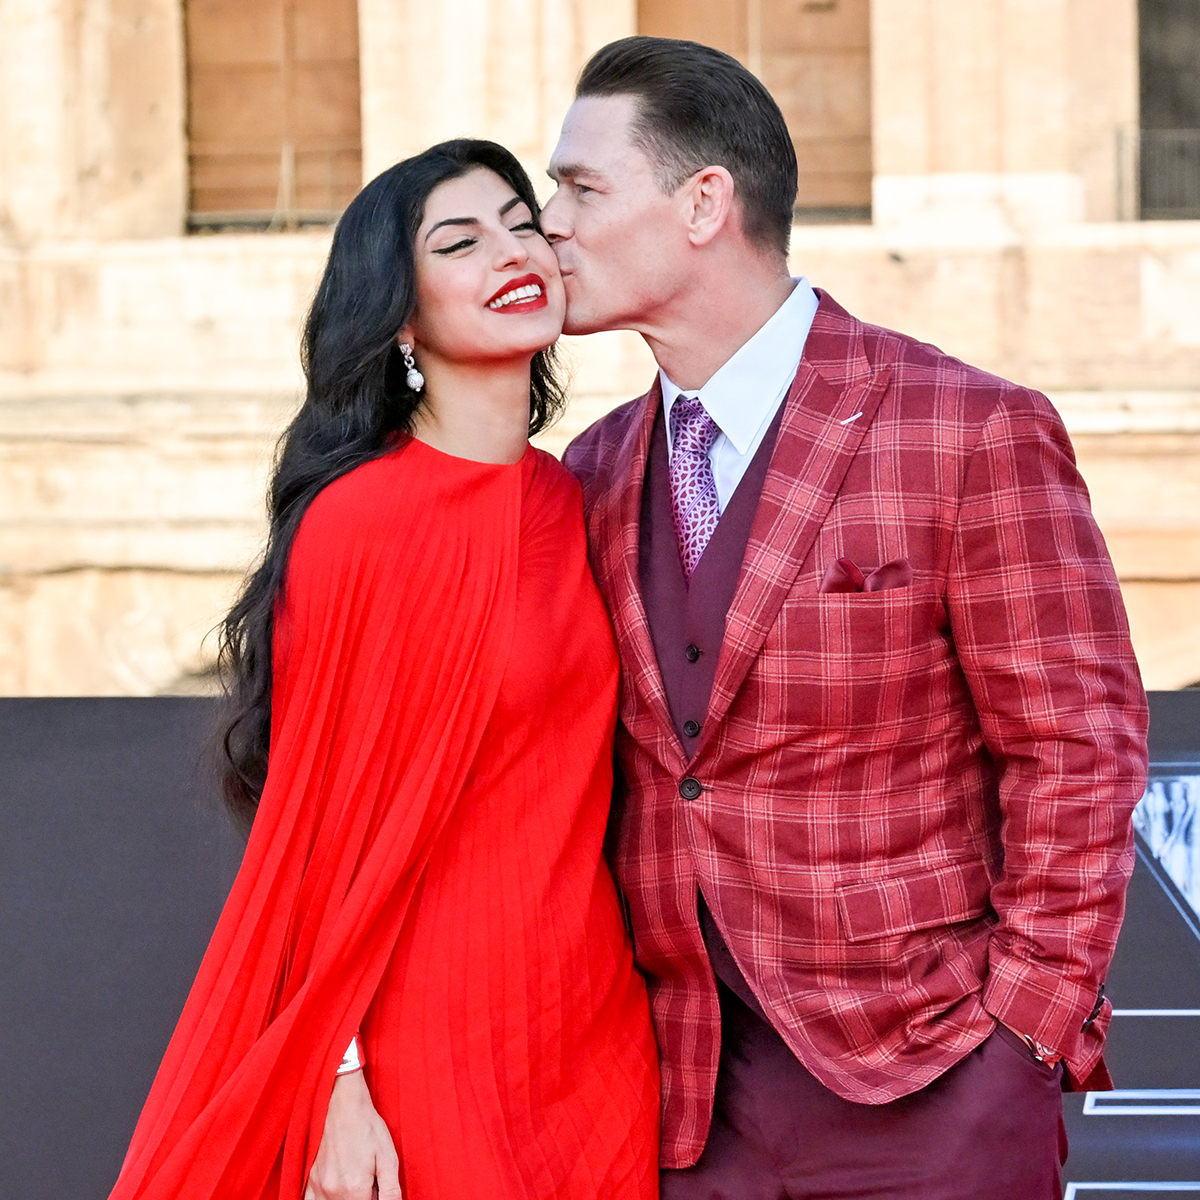 John Cena News, Pictures, and Videos - E! Online